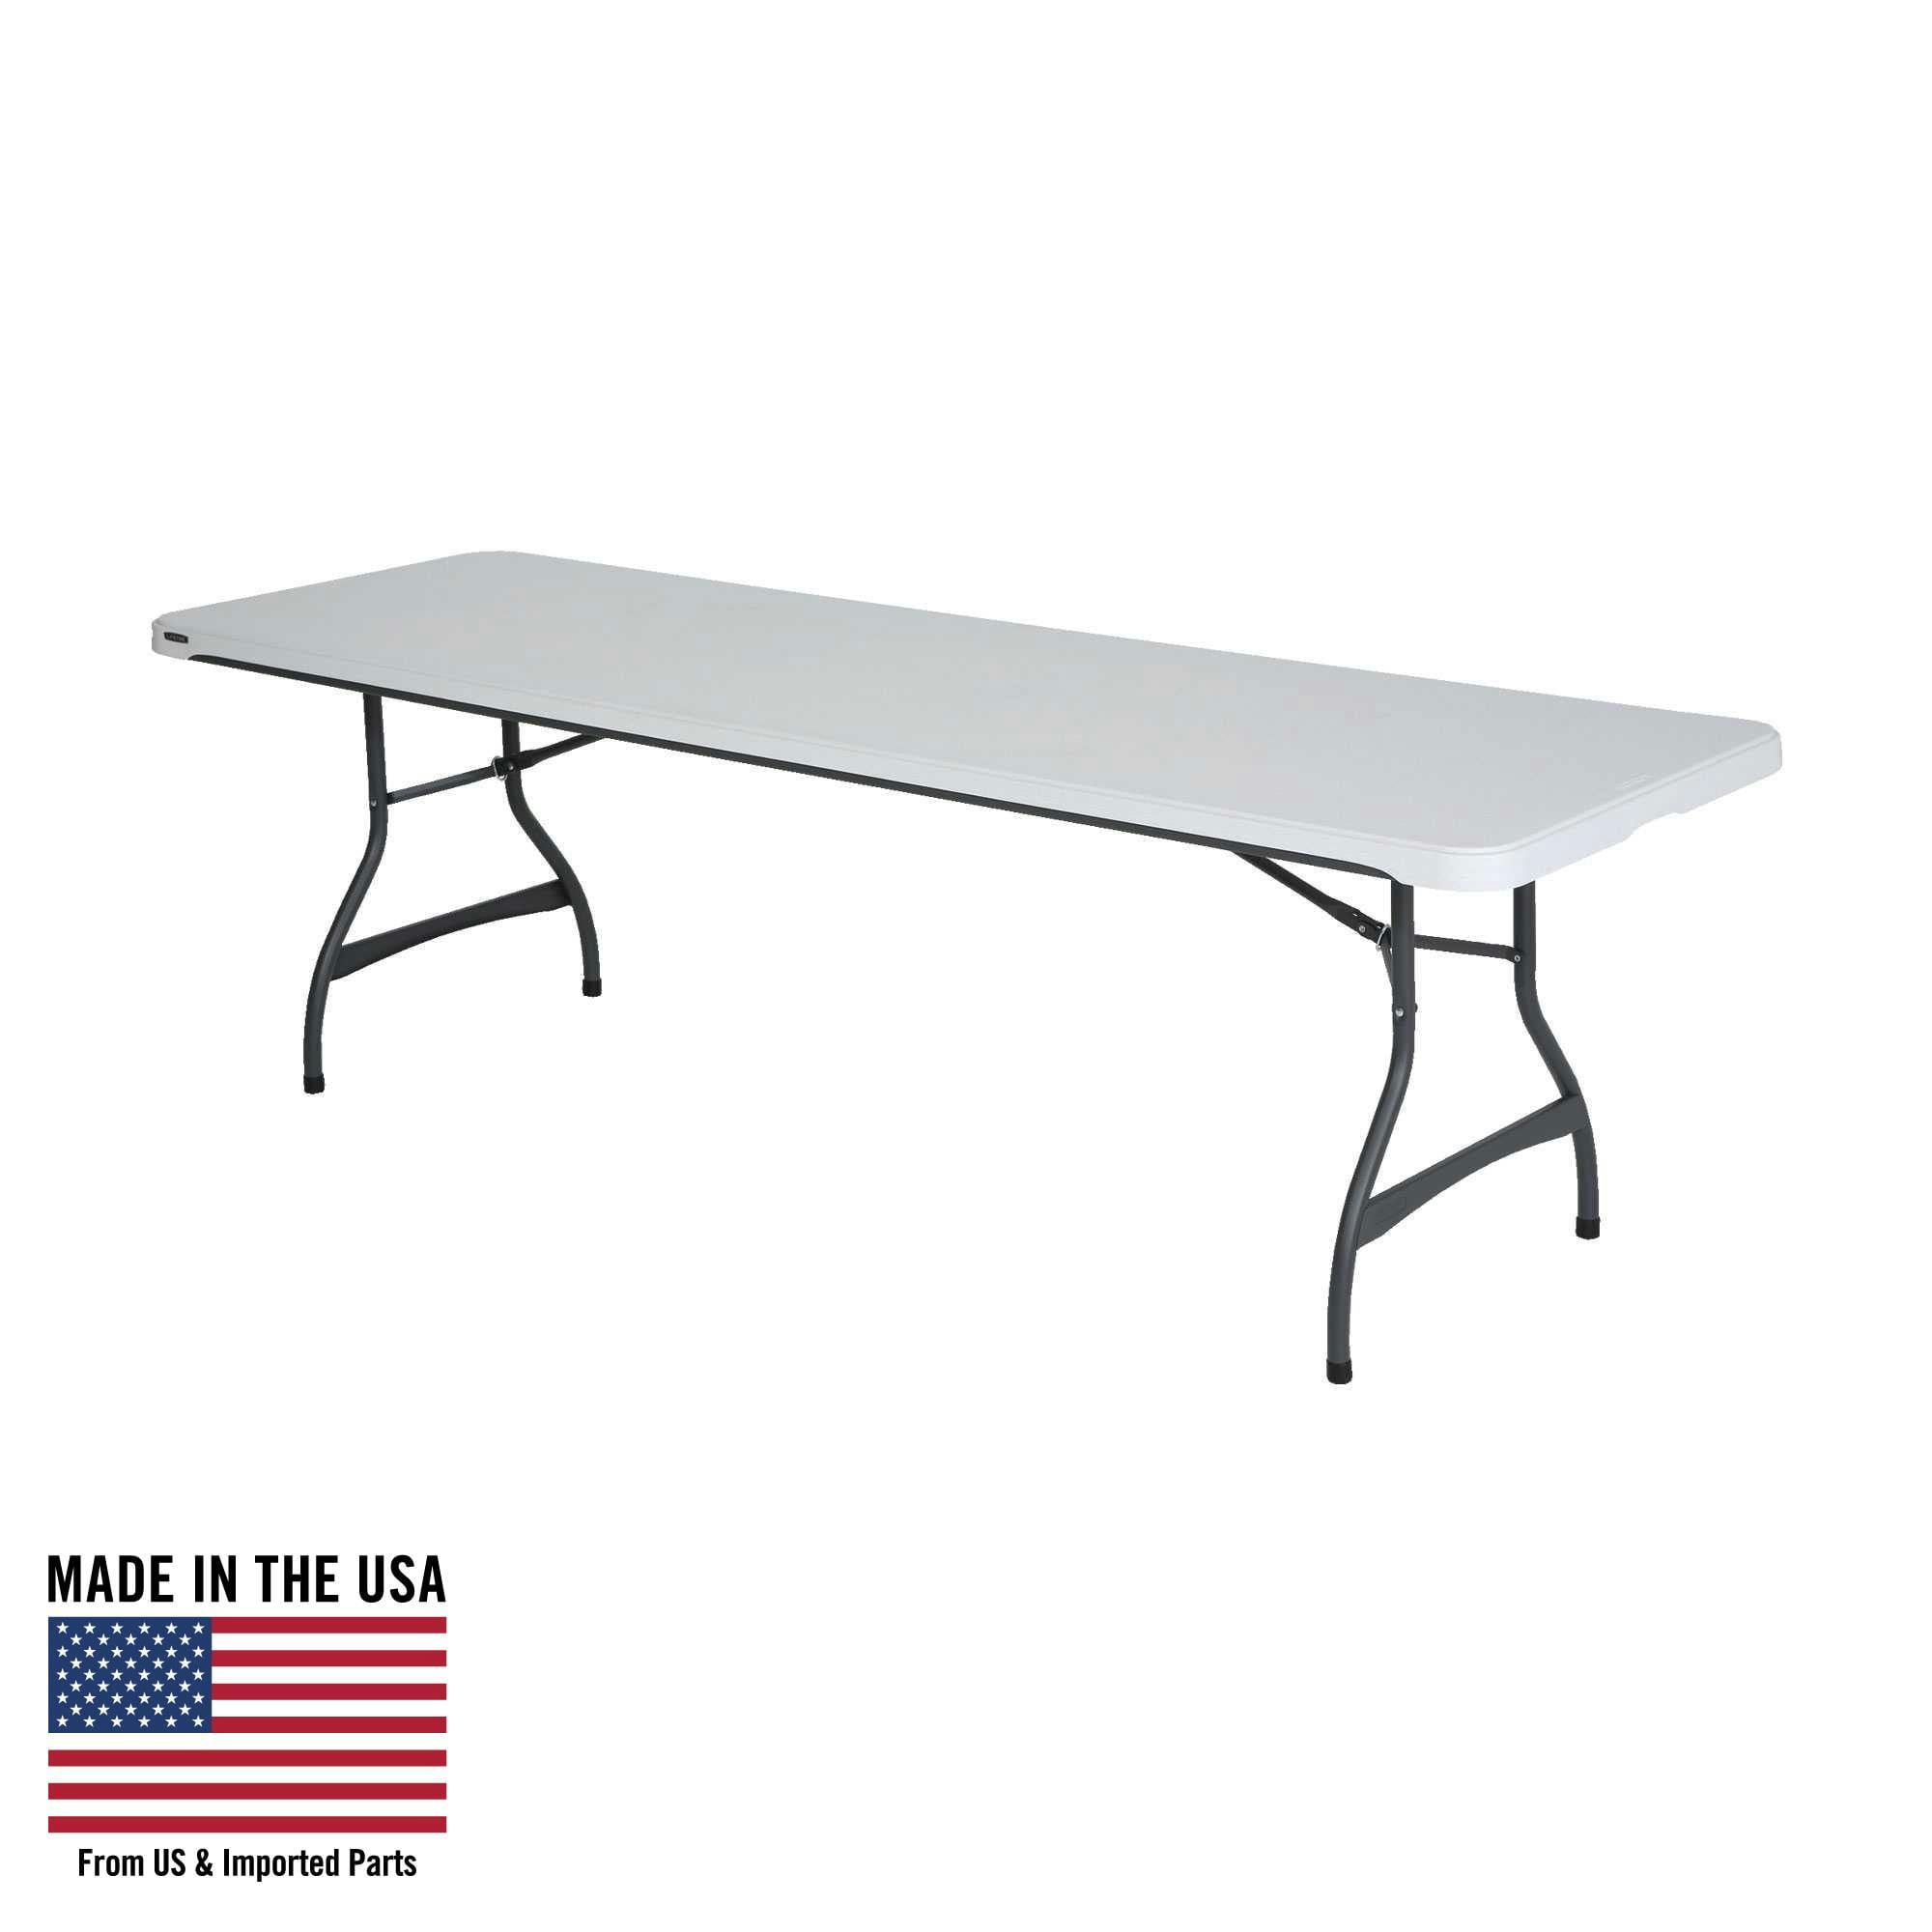 Granite White 96'' Foldable Indoor/Outdoor Banquet Table